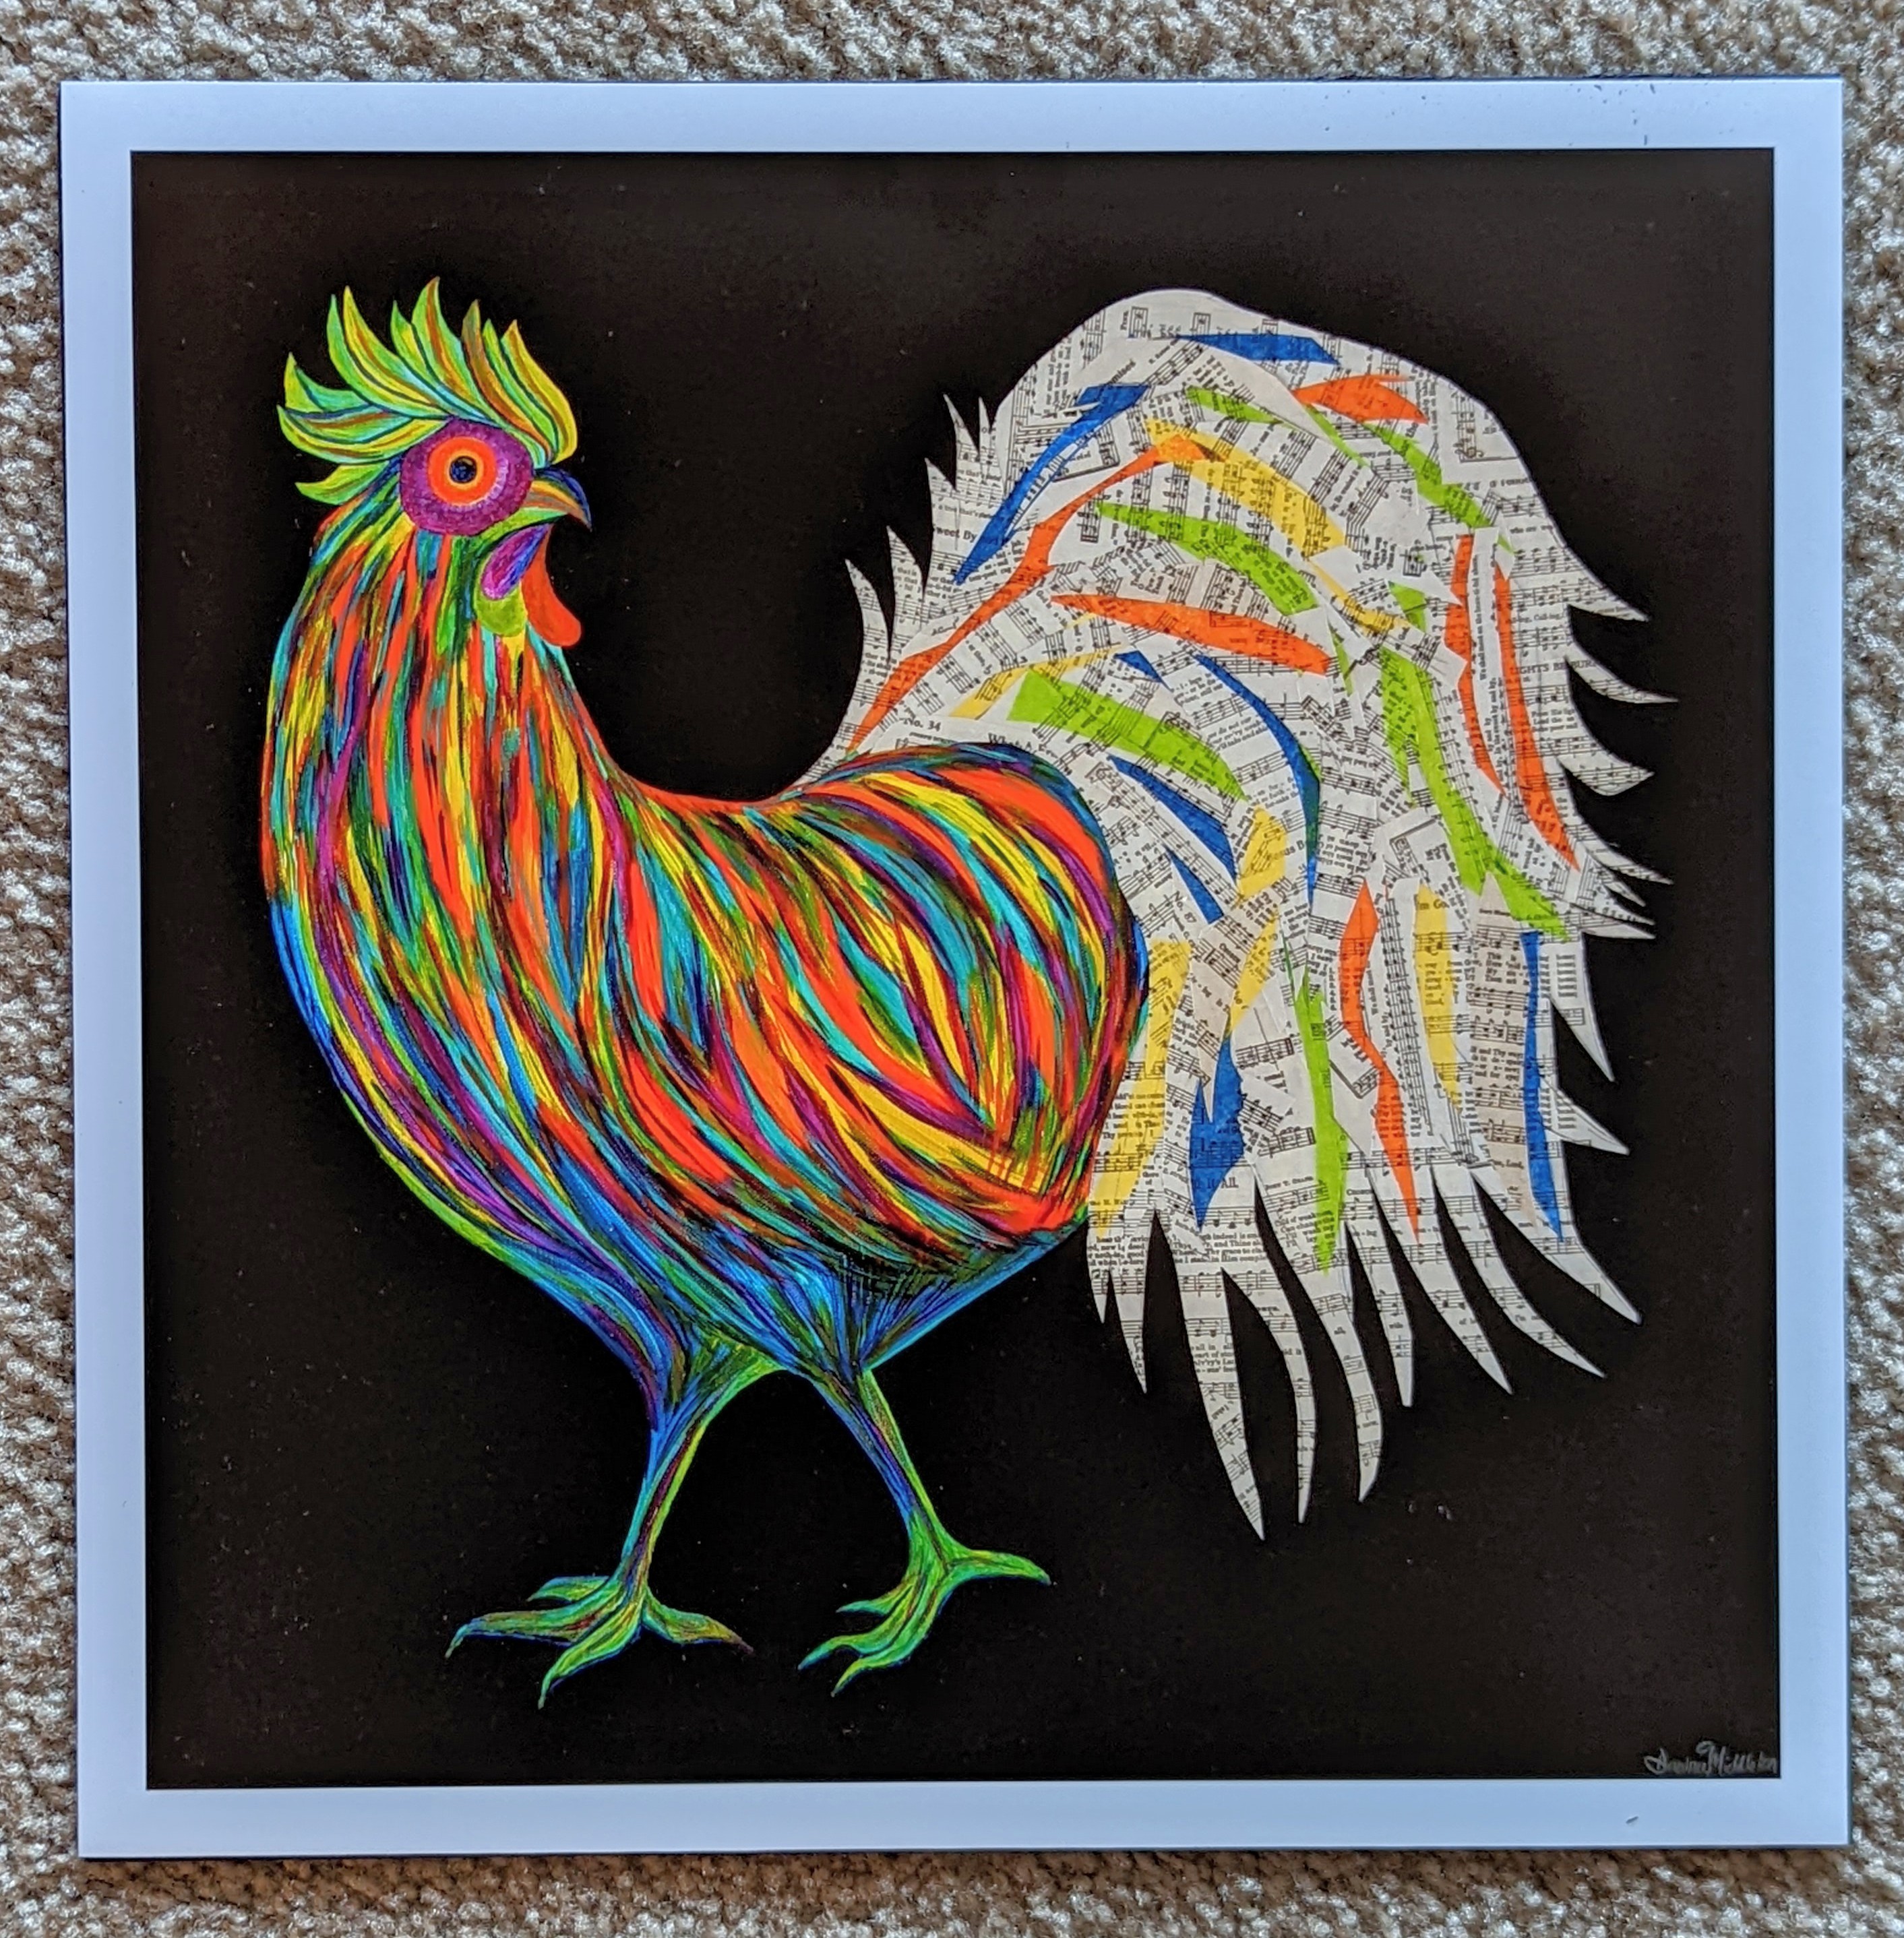 A painting of a rooster